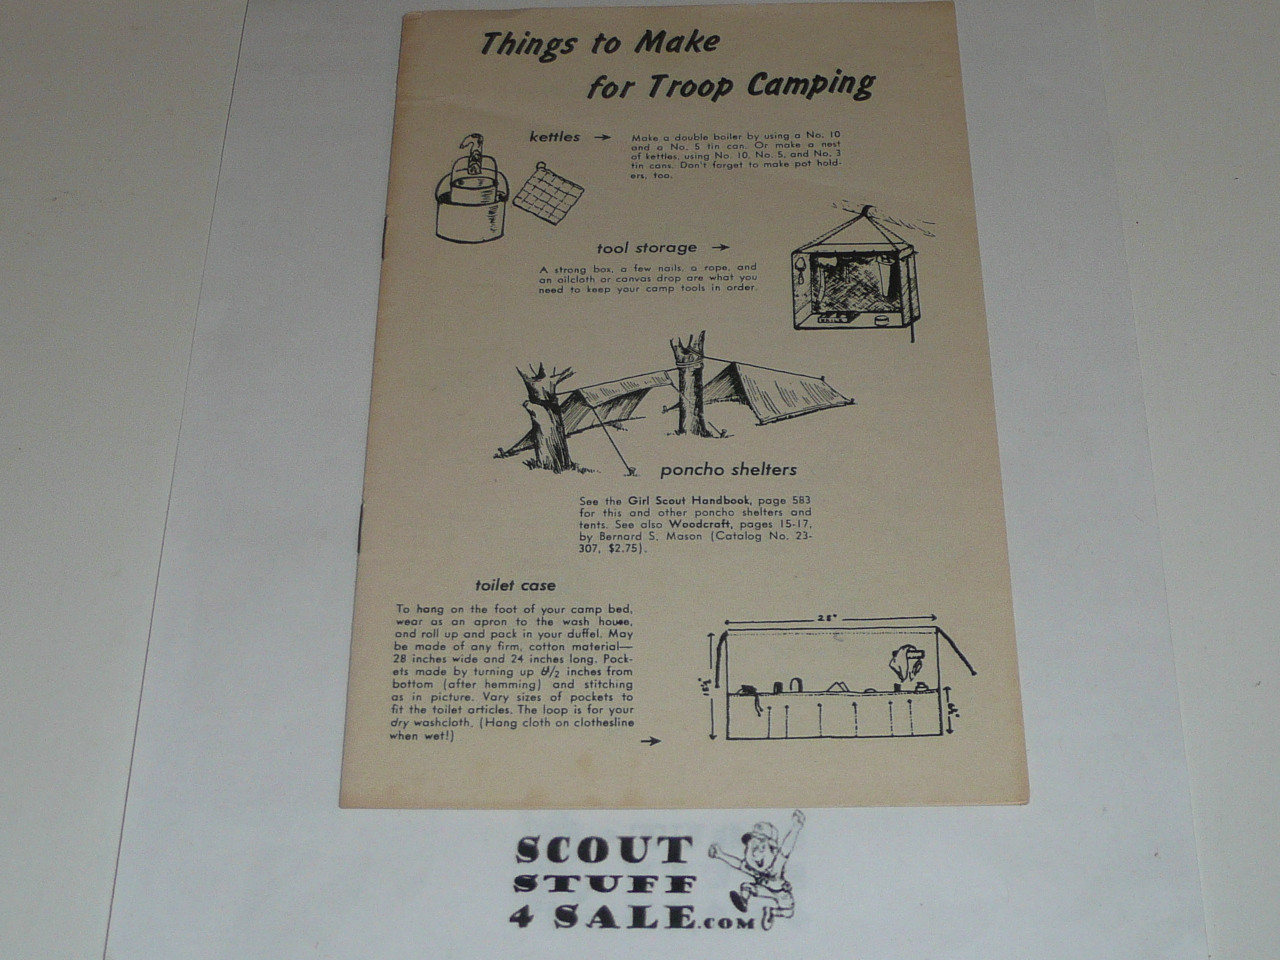 1944 Things to Make for Troop Camping, Girl Scouts of America